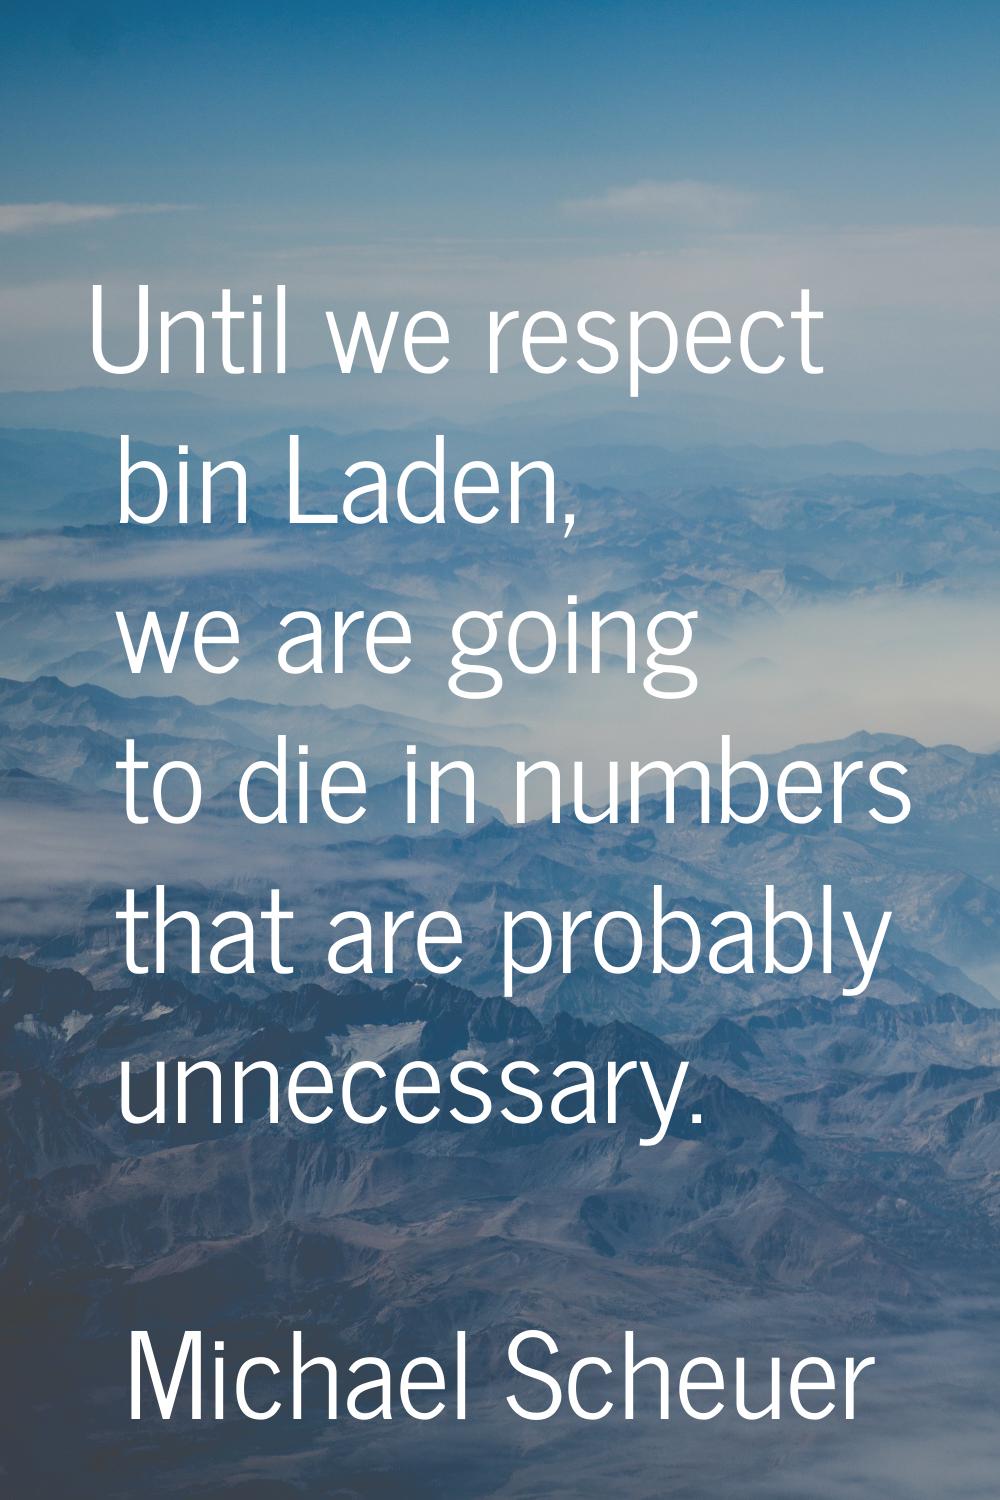 Until we respect bin Laden, we are going to die in numbers that are probably unnecessary.